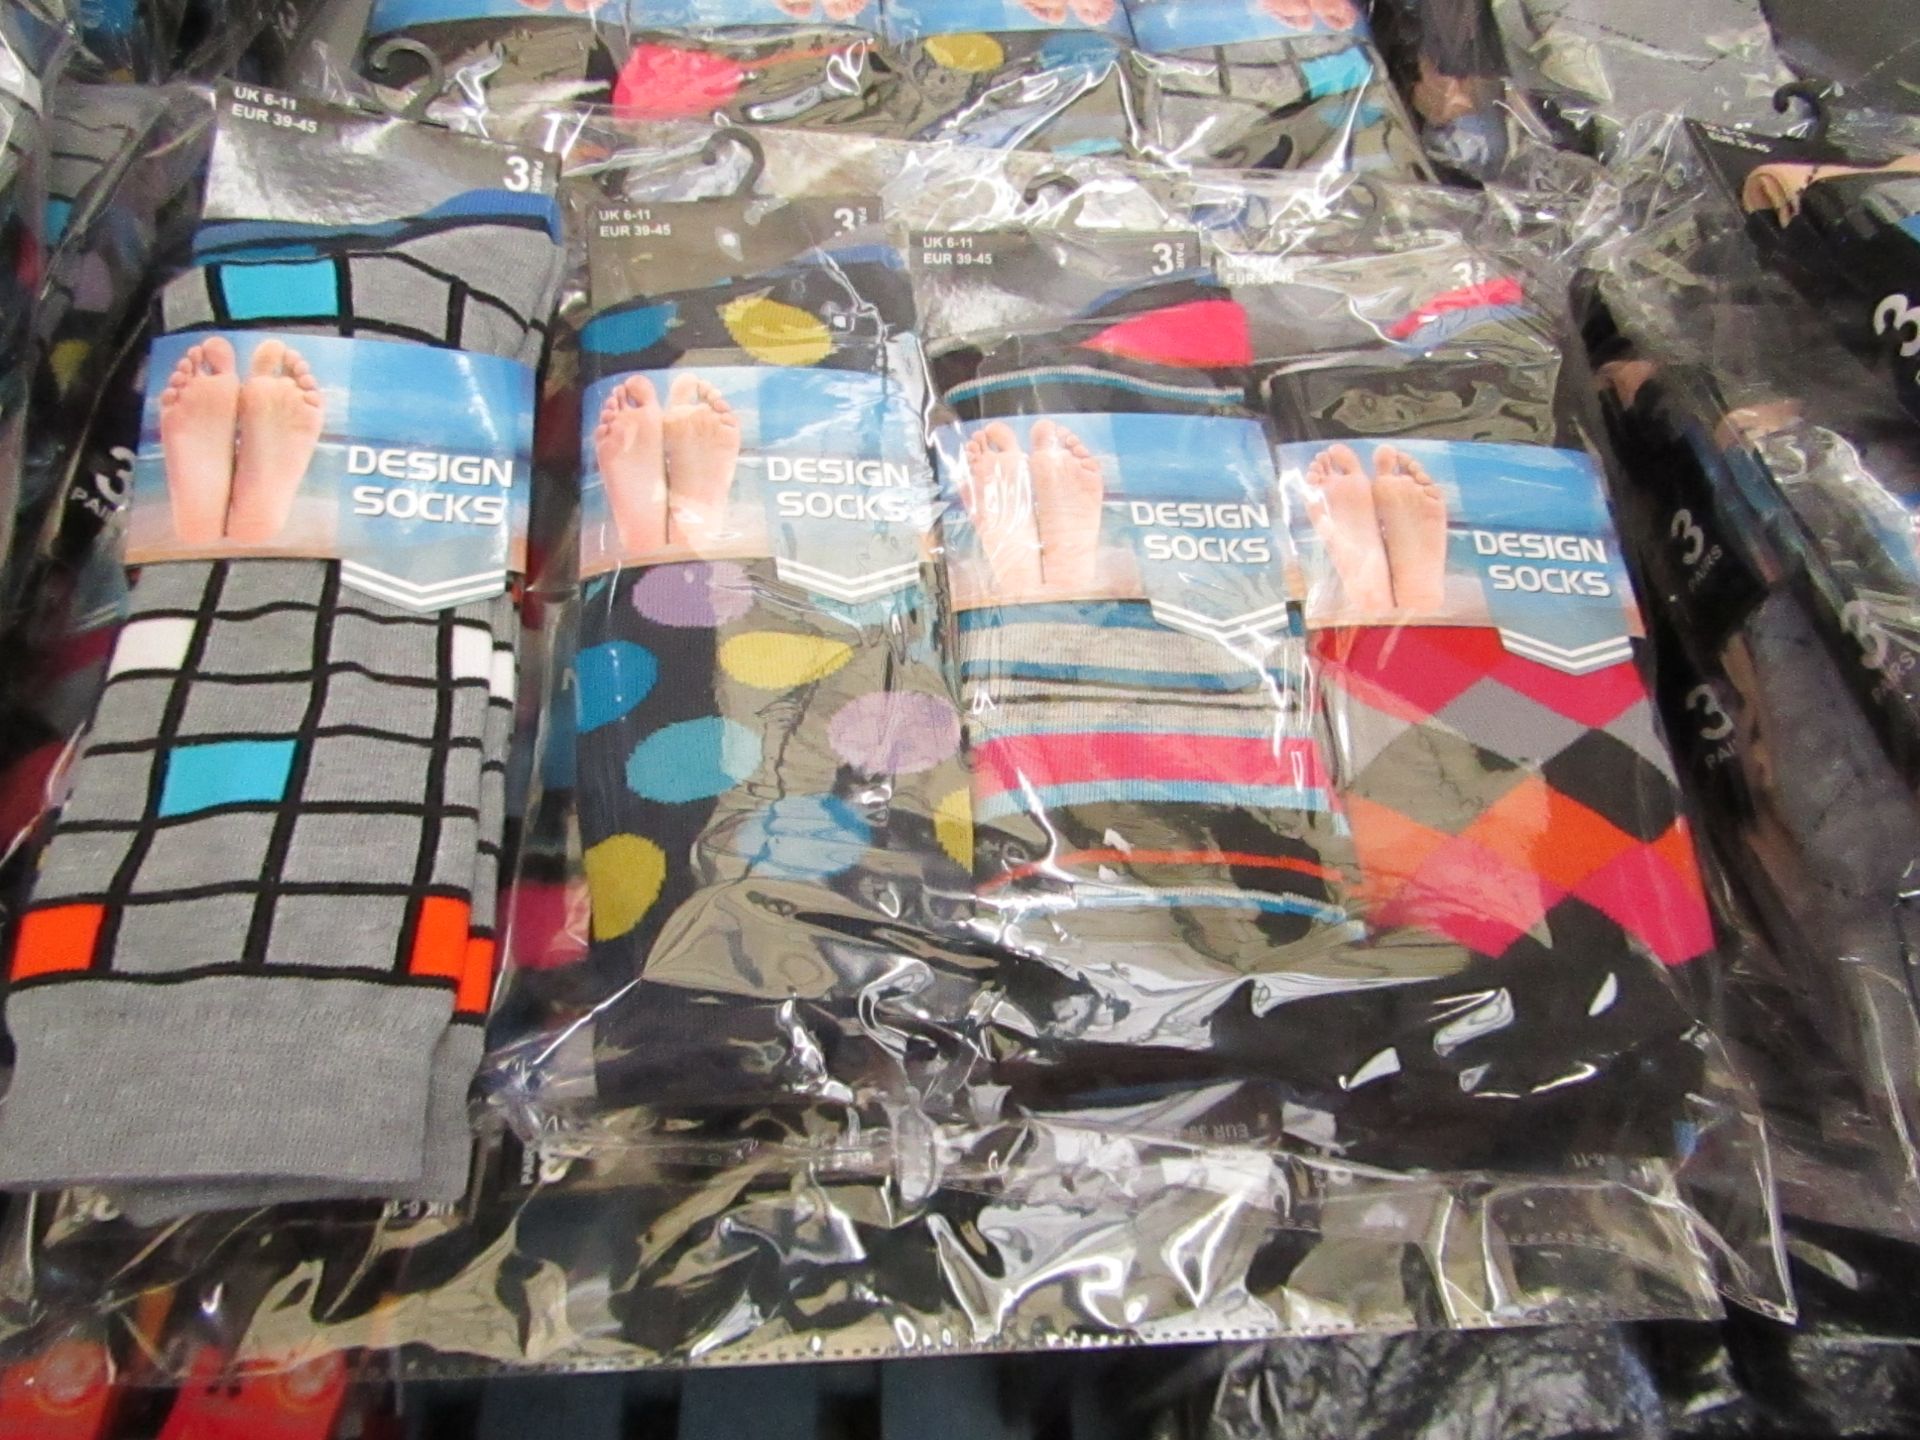 Pack of 12 pairs Mens Design Patterned Socks size 6-11 all new in packaging